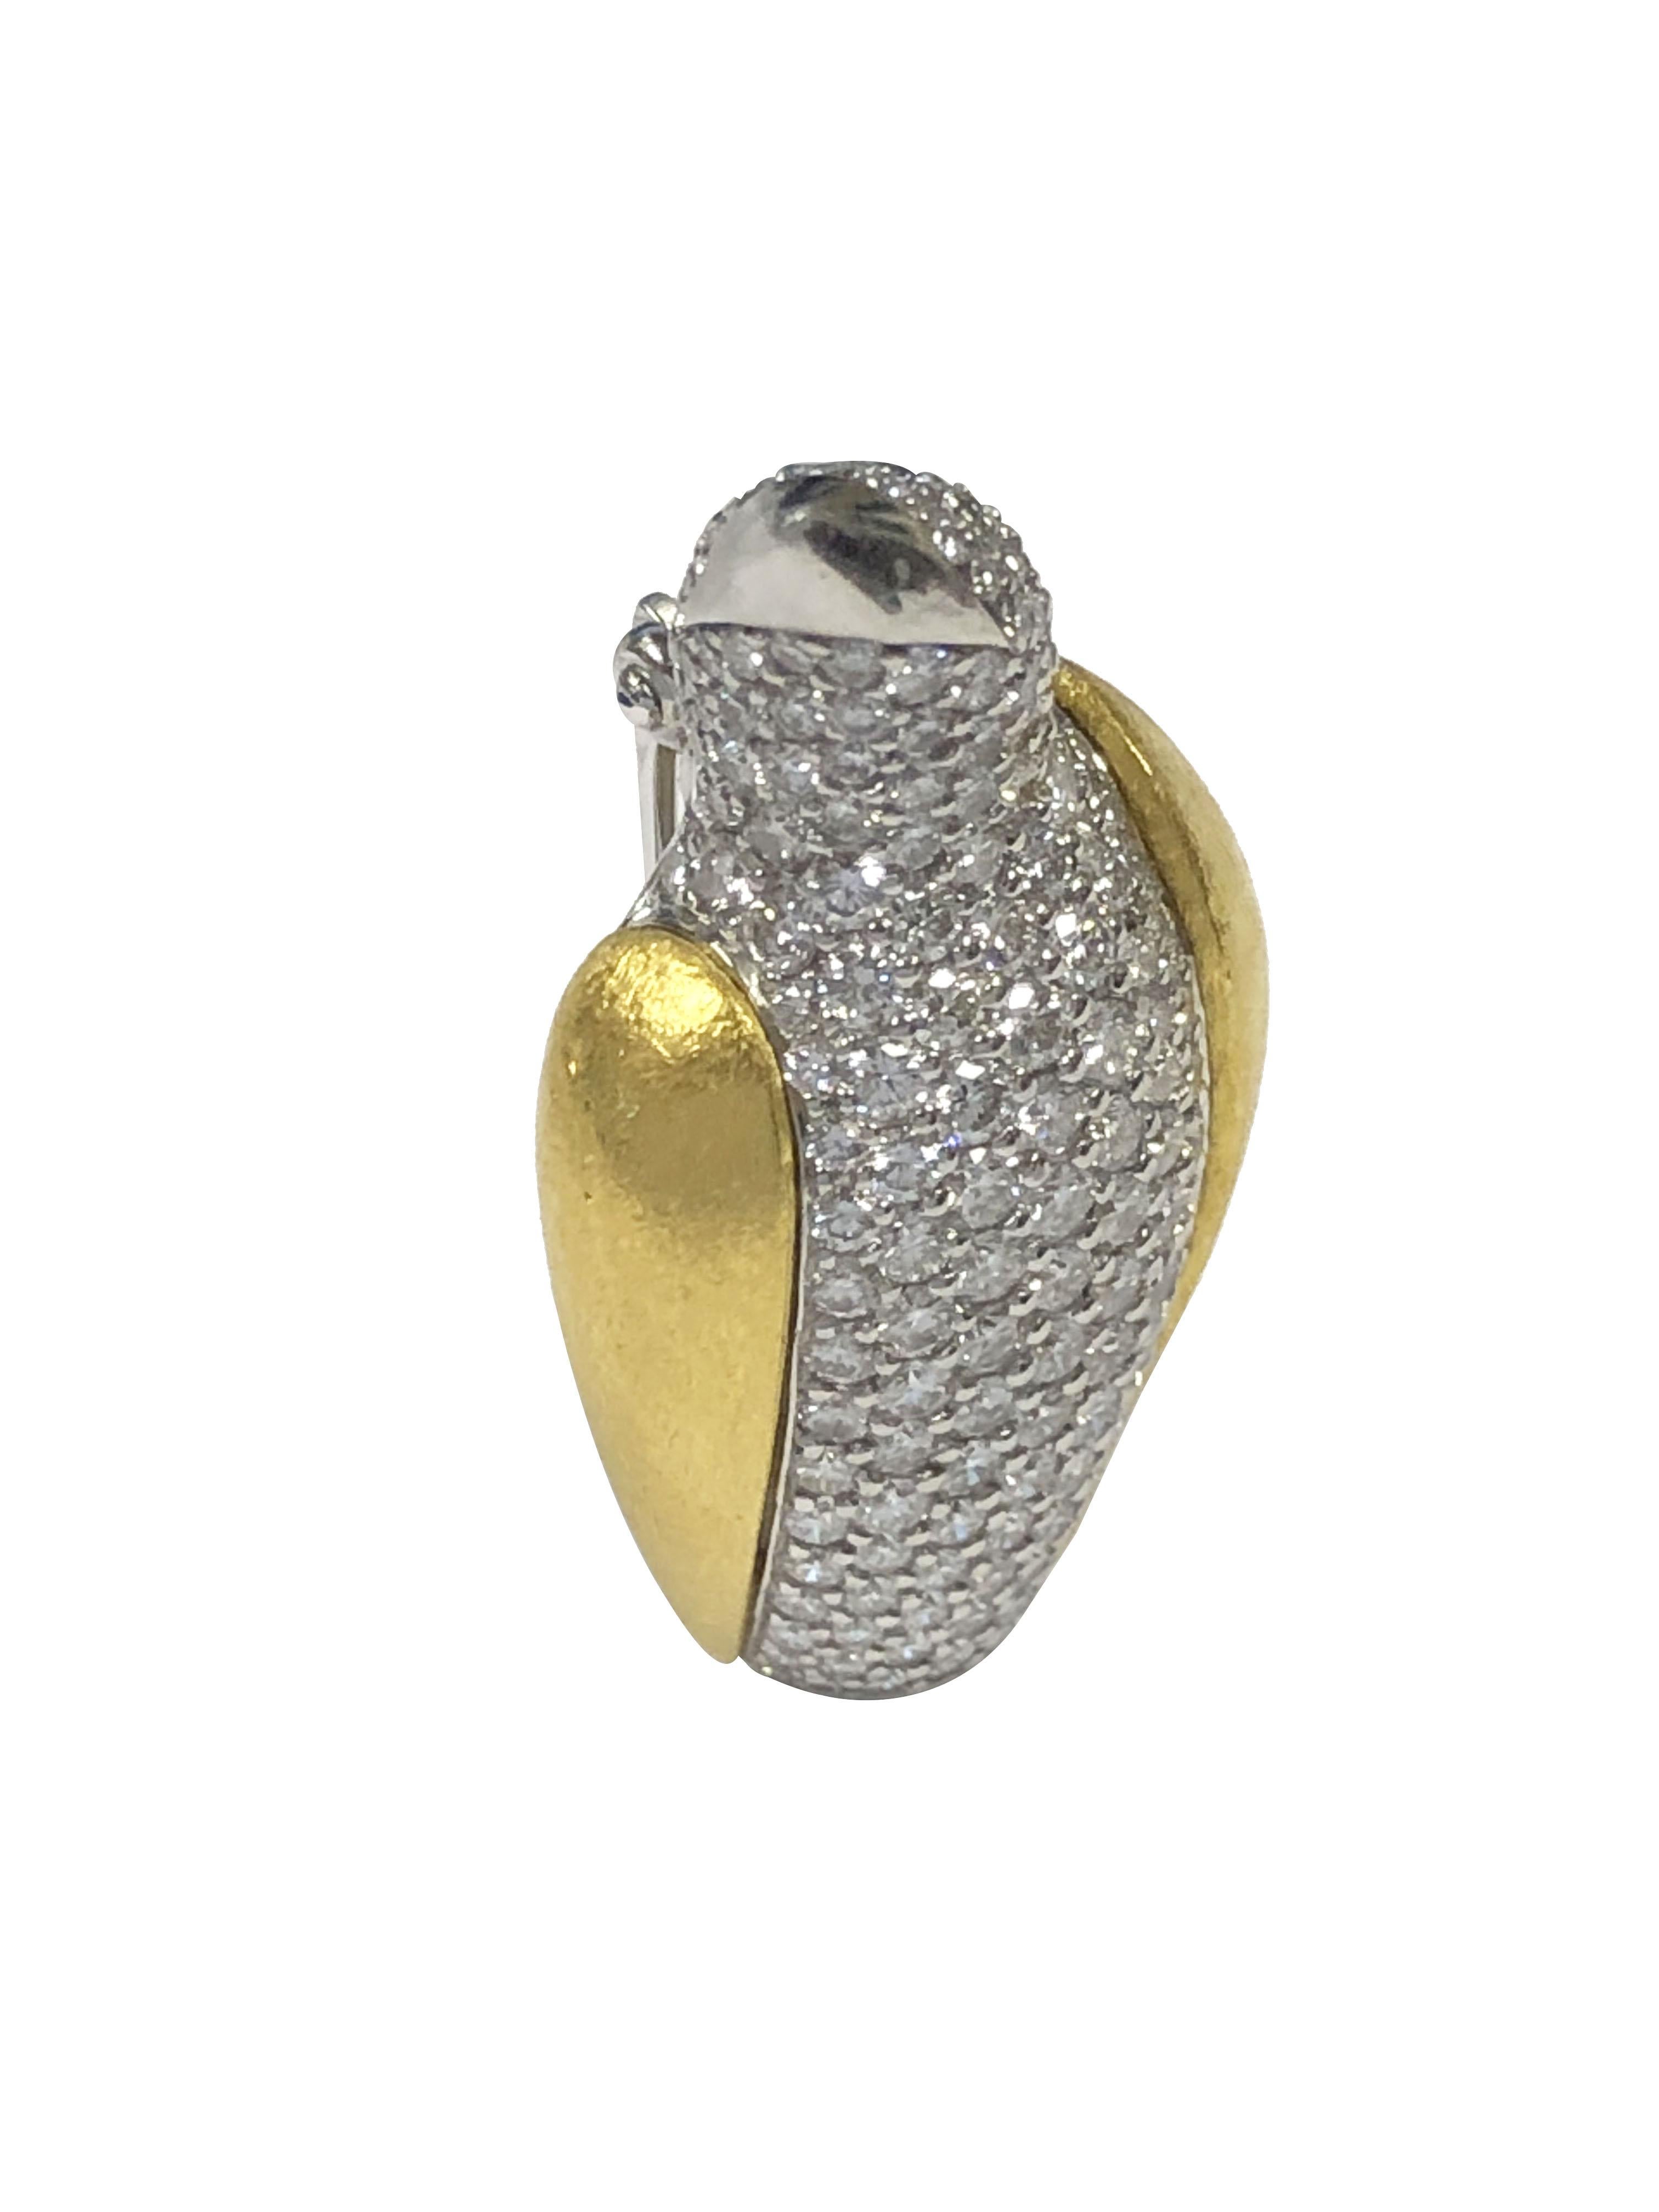 Circa 2000 Penguin Brooch by American Designer / Jeweler Mark Patterson, Superior quality to rival any fine Jewelry House this 18K Yellow Gold and Platinum piece measures 1 3/8 inches in length, 3/4 inch wide and weighs 13.7 Grams, set with Round